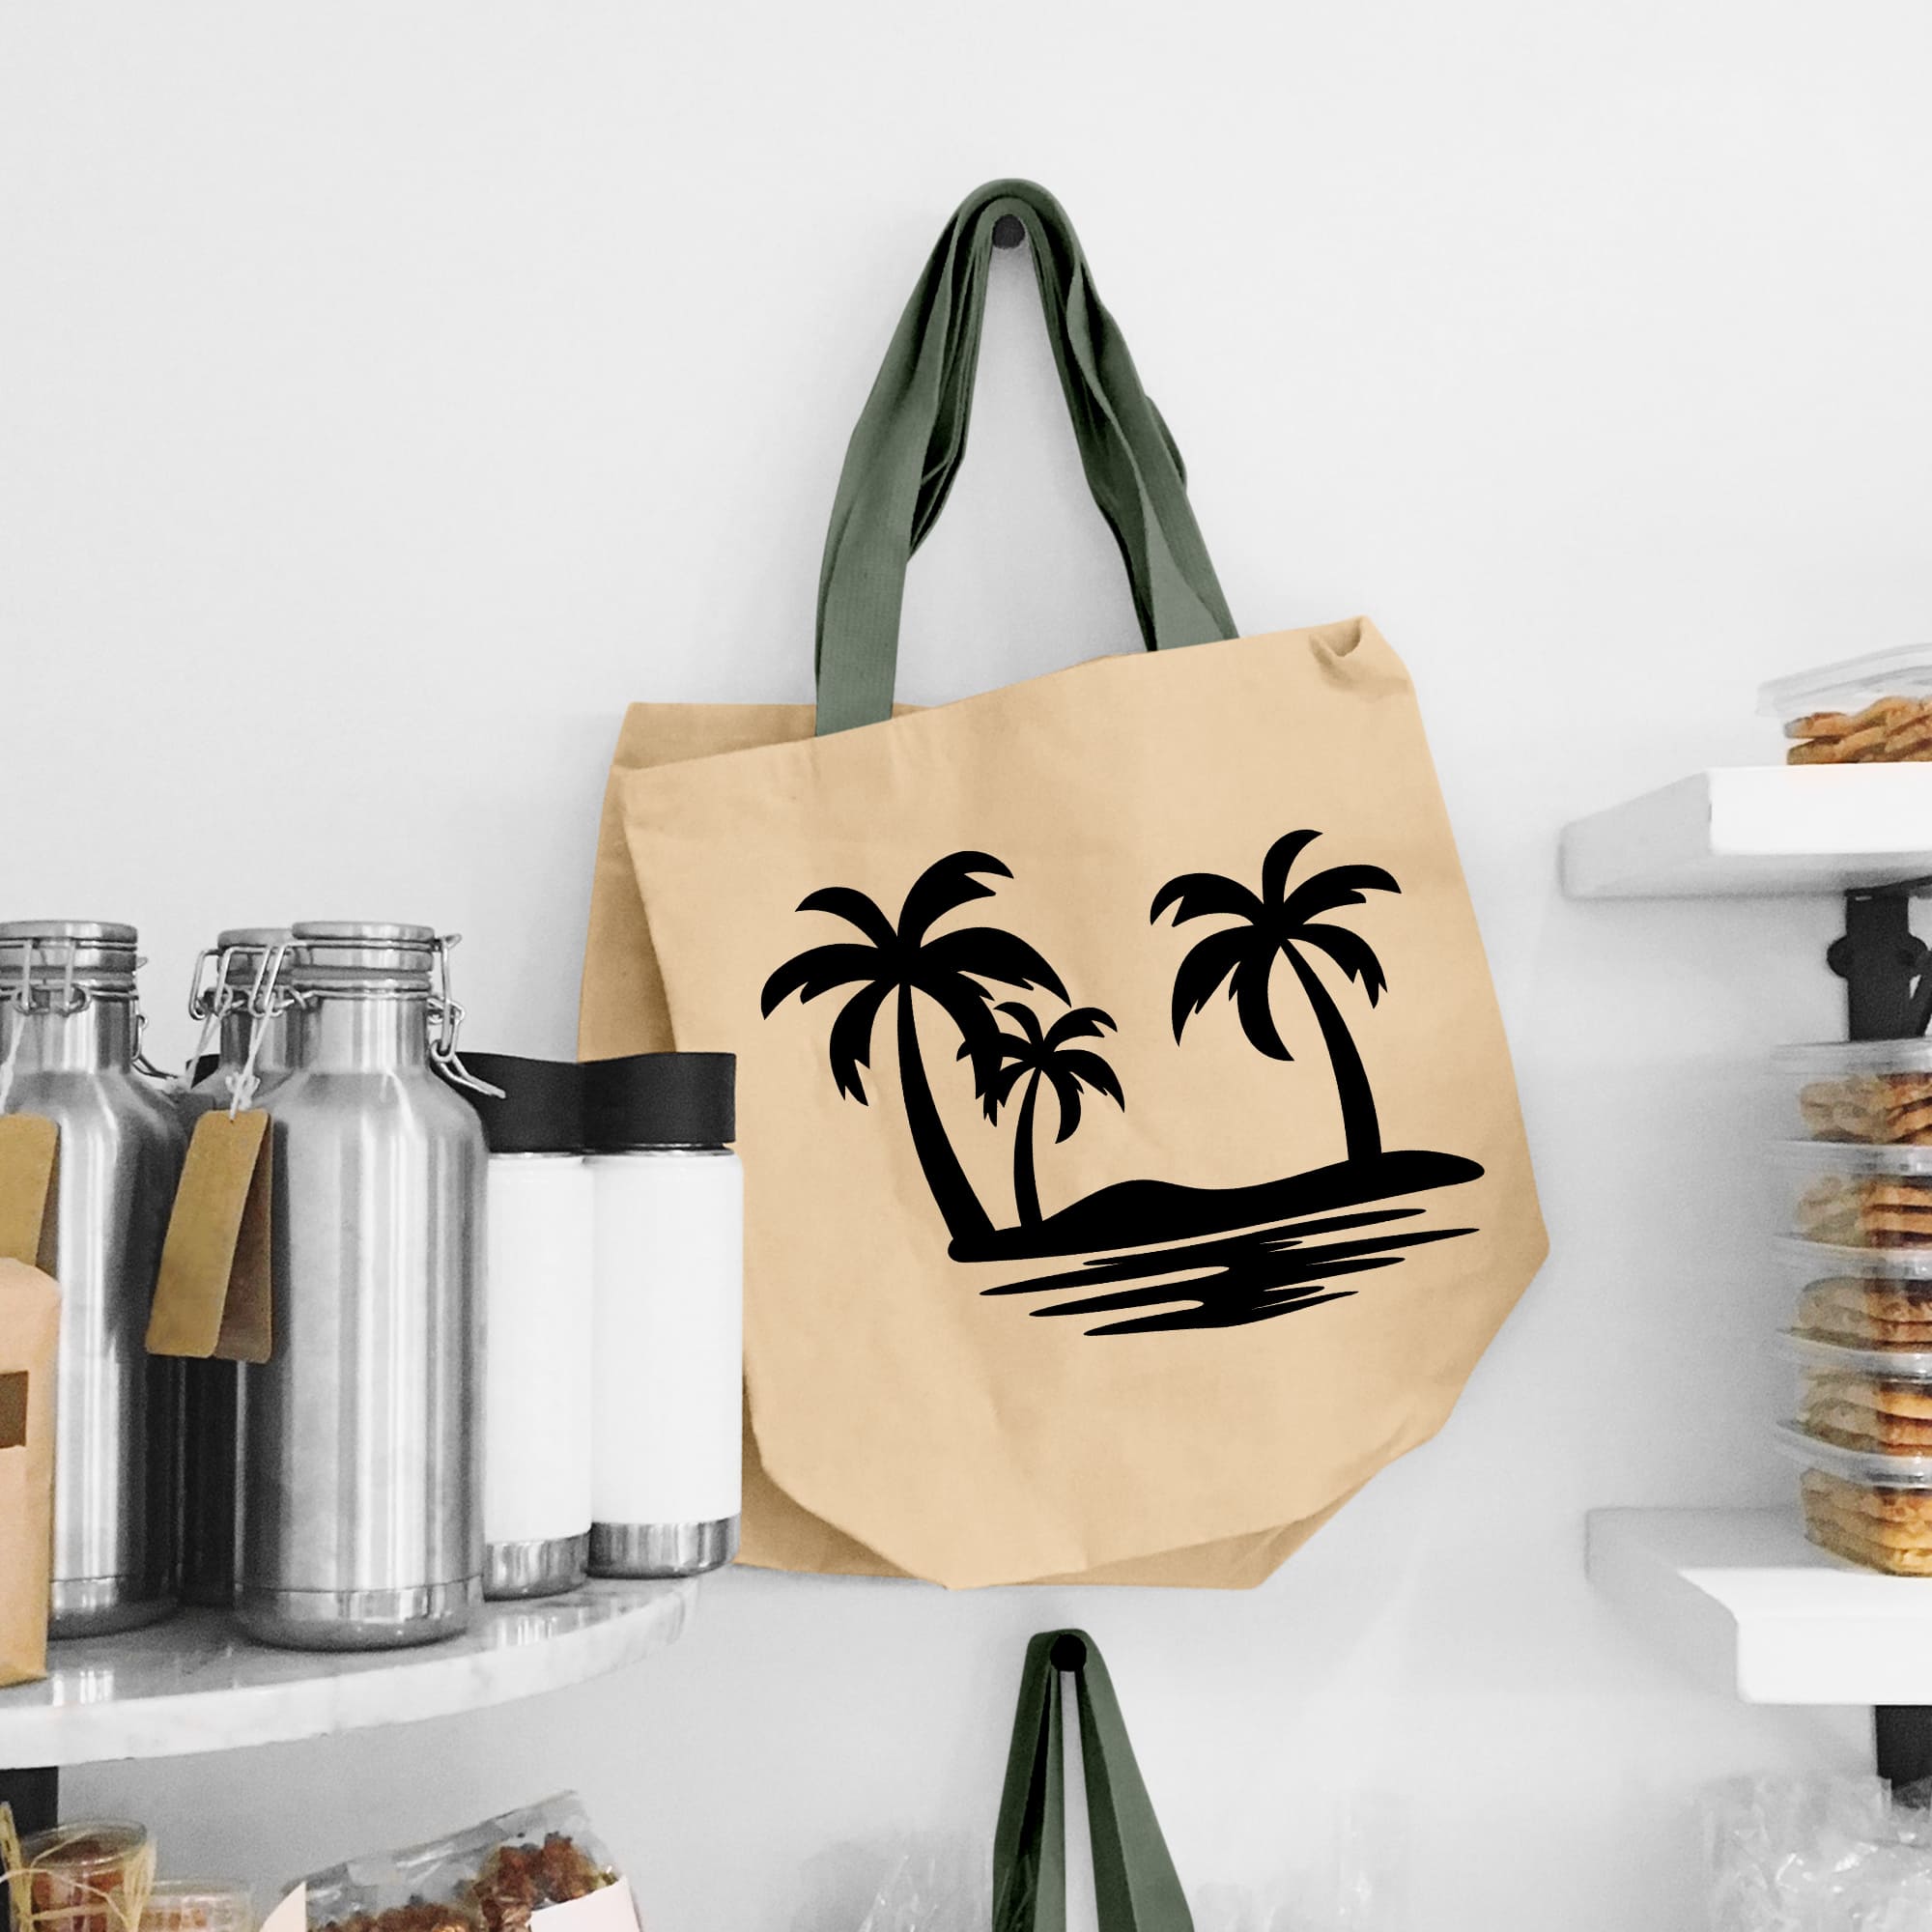 Silhouettes of palm trees are drawn on the grocery bag.